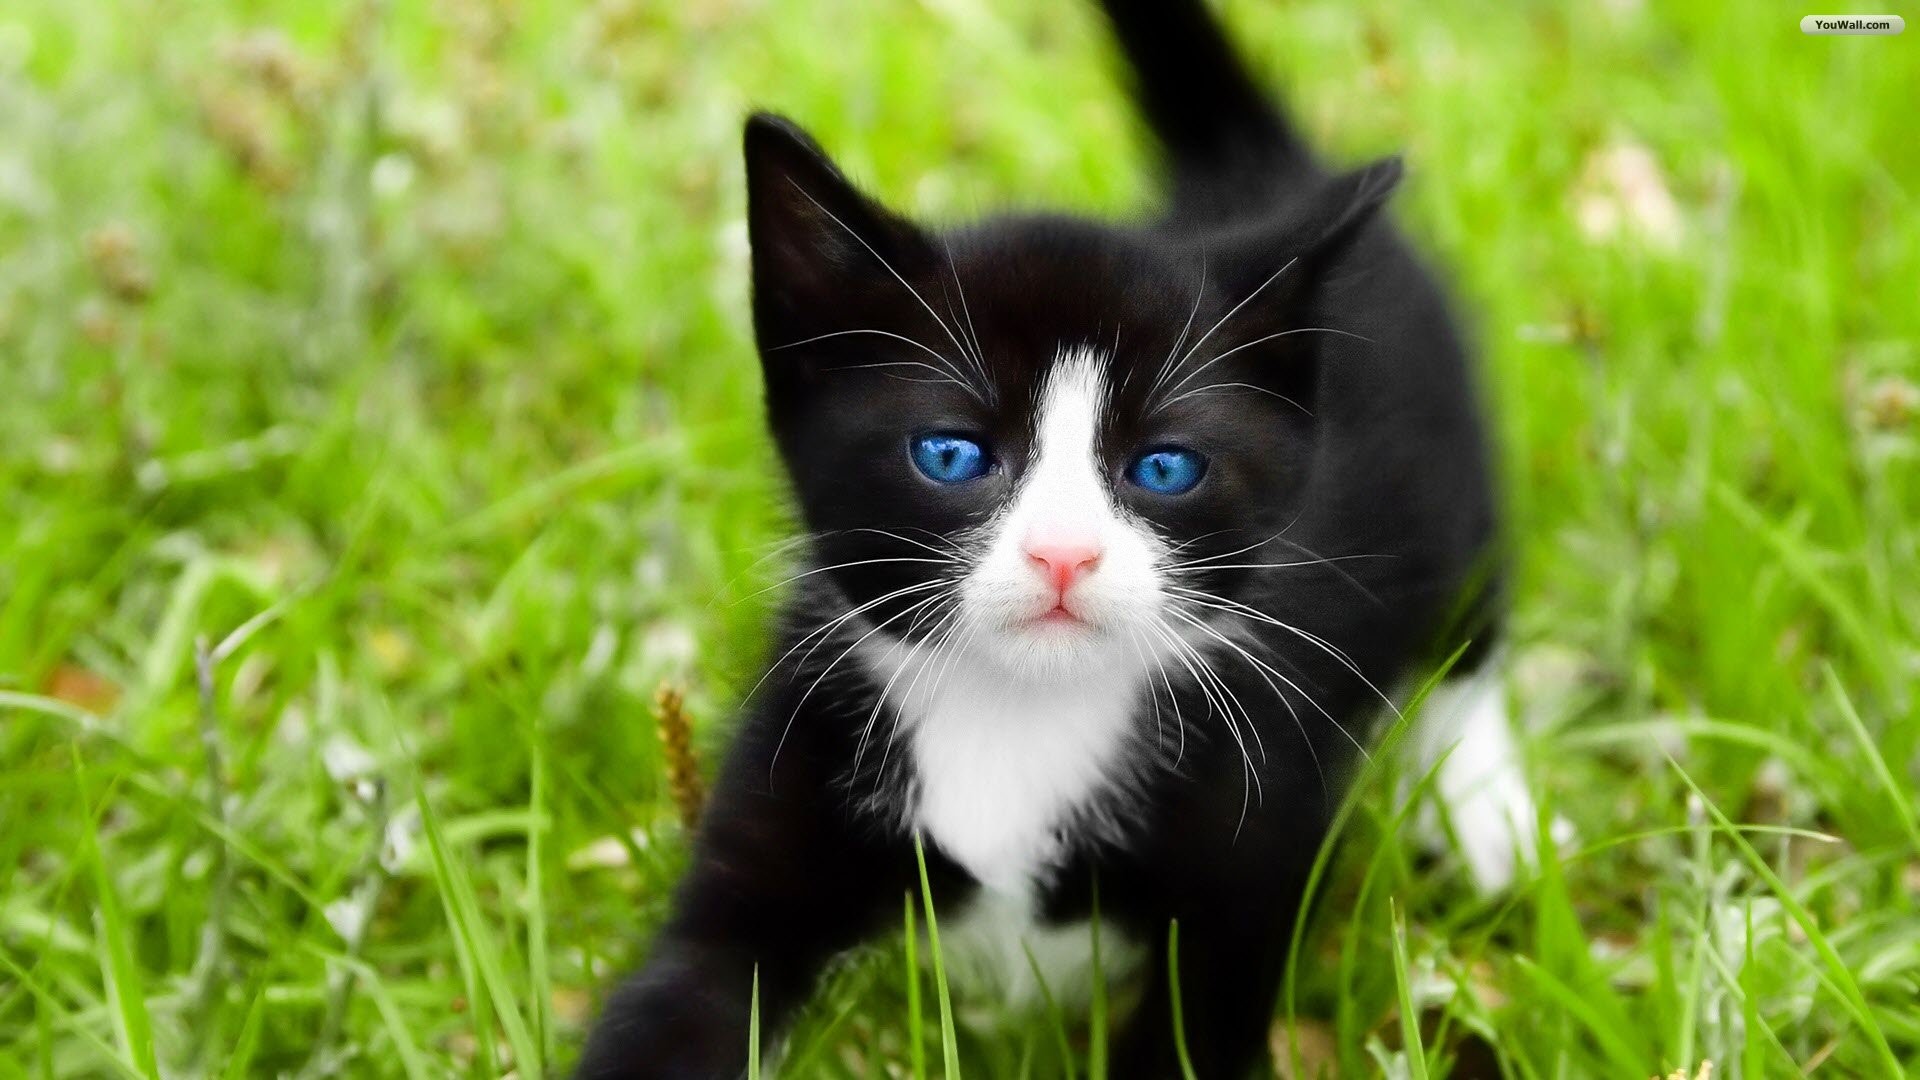 1920x1080 Black Cat With Blue Eyes Wallpaper